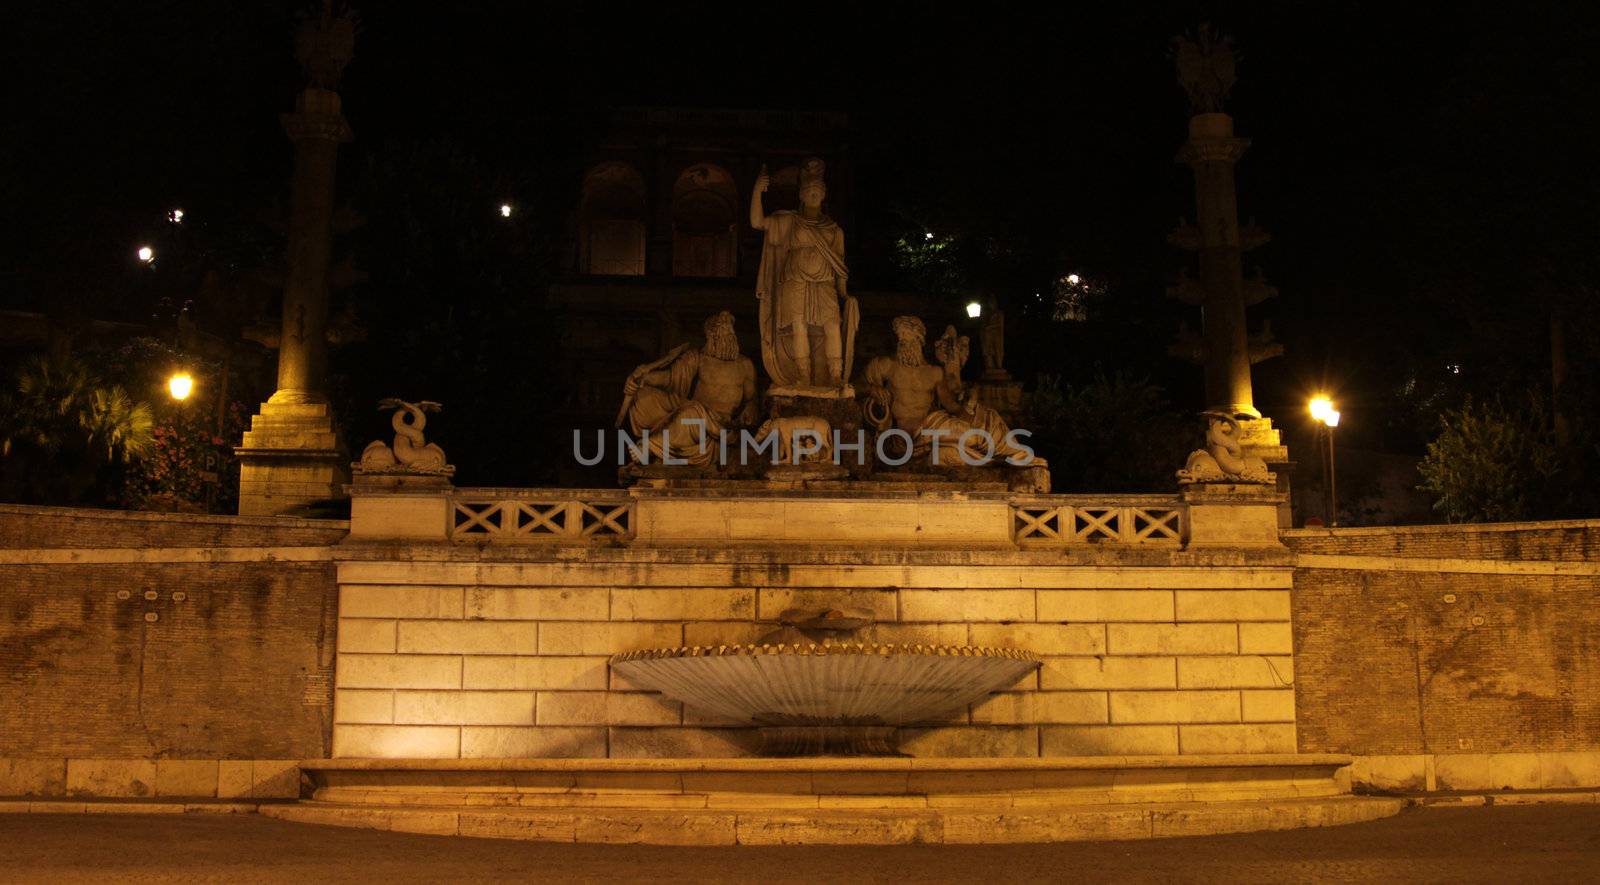 The Rome between the Tiber and the Aniene fountain, located in Piazza del Popolo, Rome, Italy. Shot at night. 